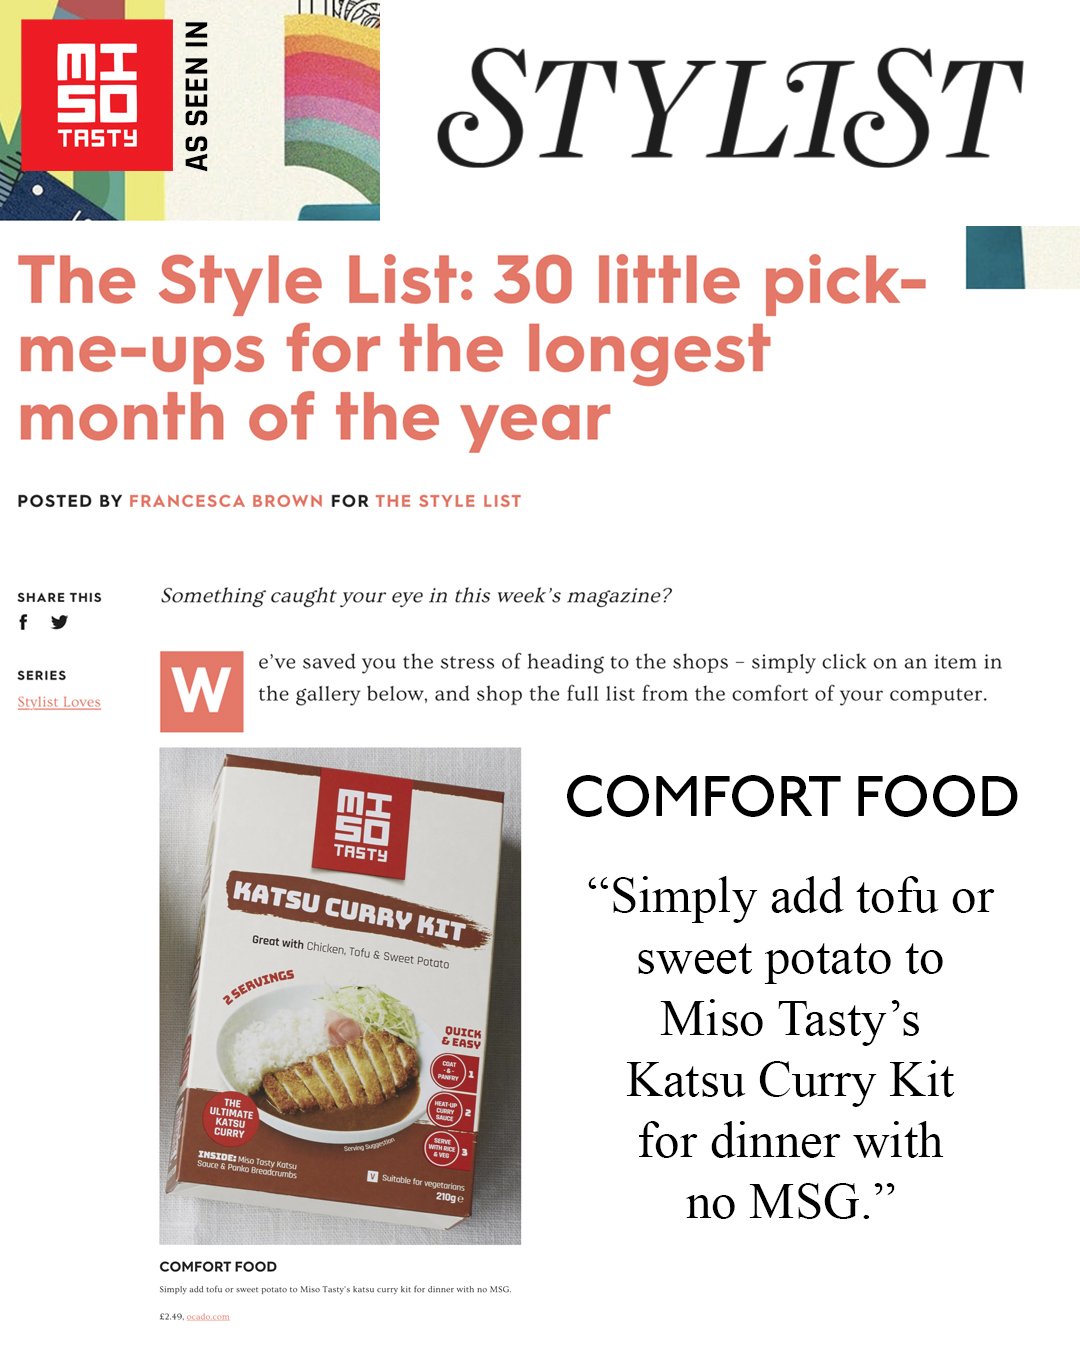 Miso Tasty's Katsu Curry Kit In Stylist's The Style List: 30 Little  Pick-me-ups for the longest month of the year — Miso Tasty